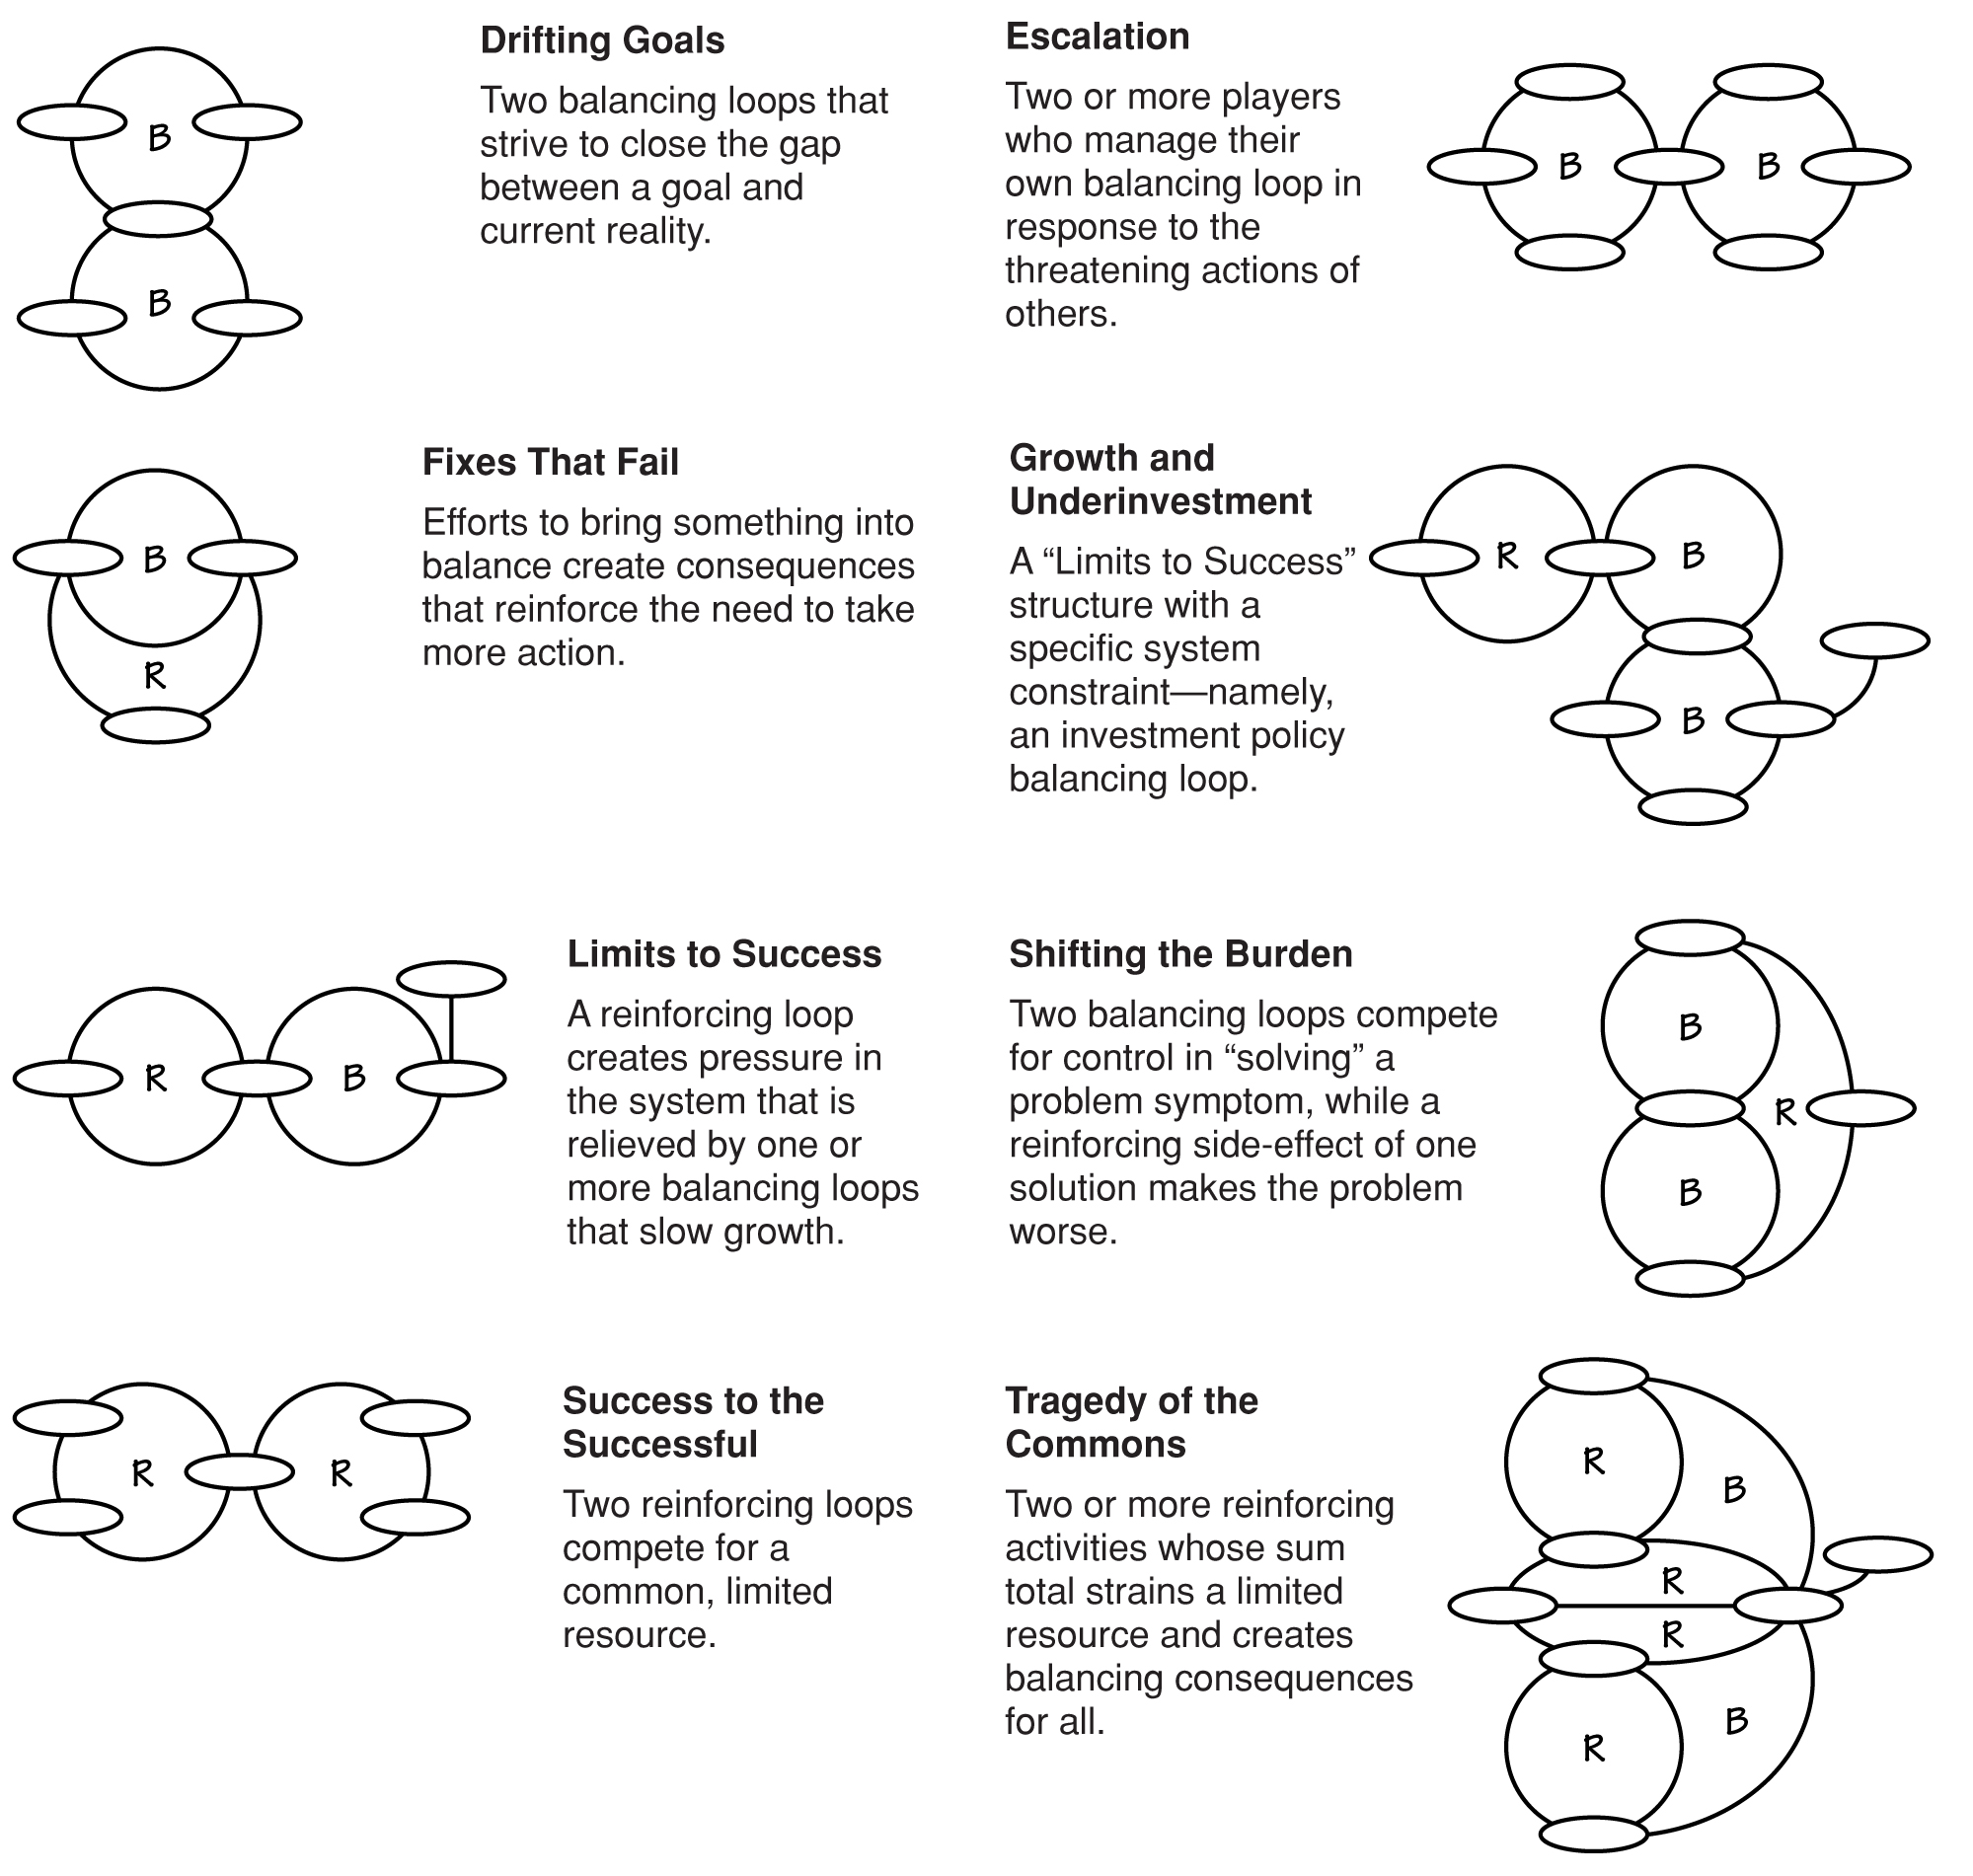 ARCHETYPES AS STRUCTURAL PATTERNS